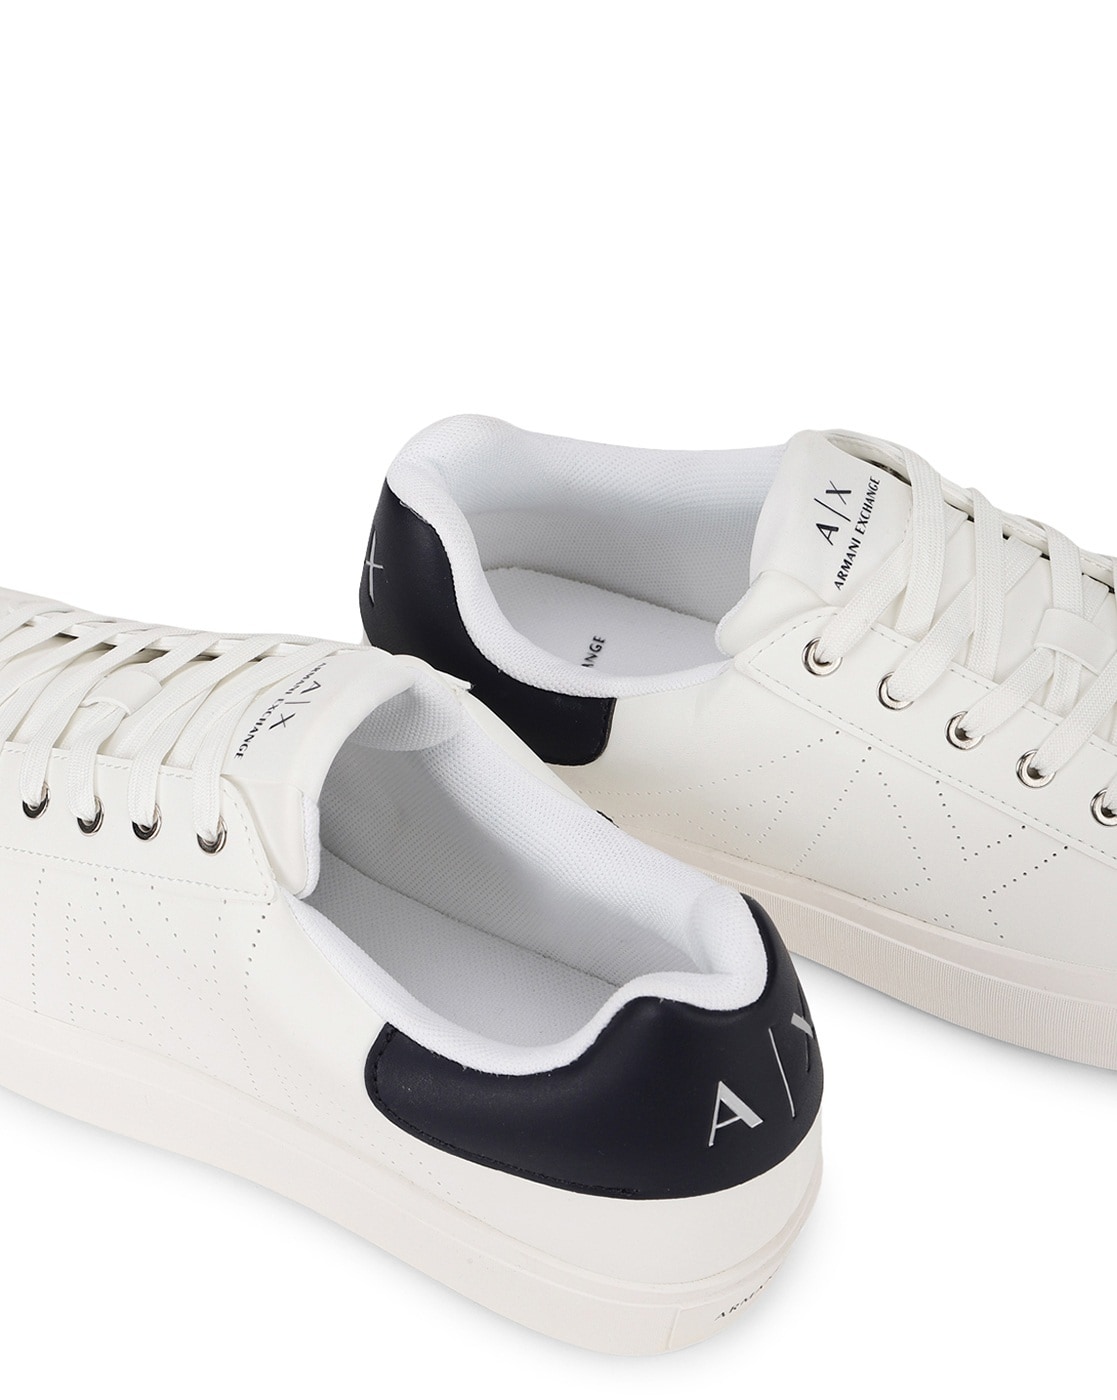 Armani Exchange Mens Leather Tennis Shoes With Aop Detail In Black |  ModeSens